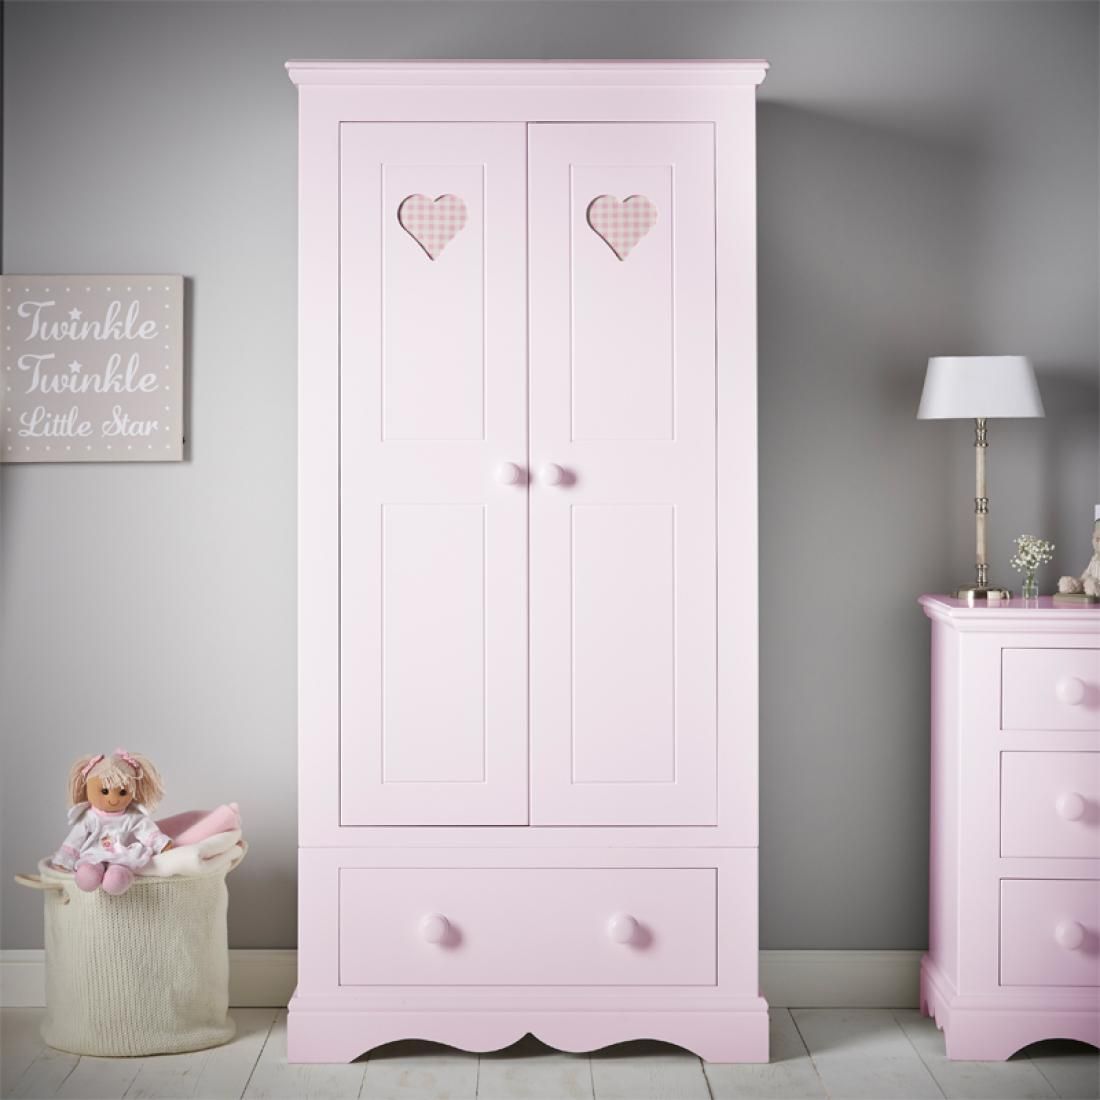 Looby Lou Wardrobe Product | Childrens Wardrobe | Girls Wardrobe Inside Childrens Pink Wardrobes (View 3 of 15)